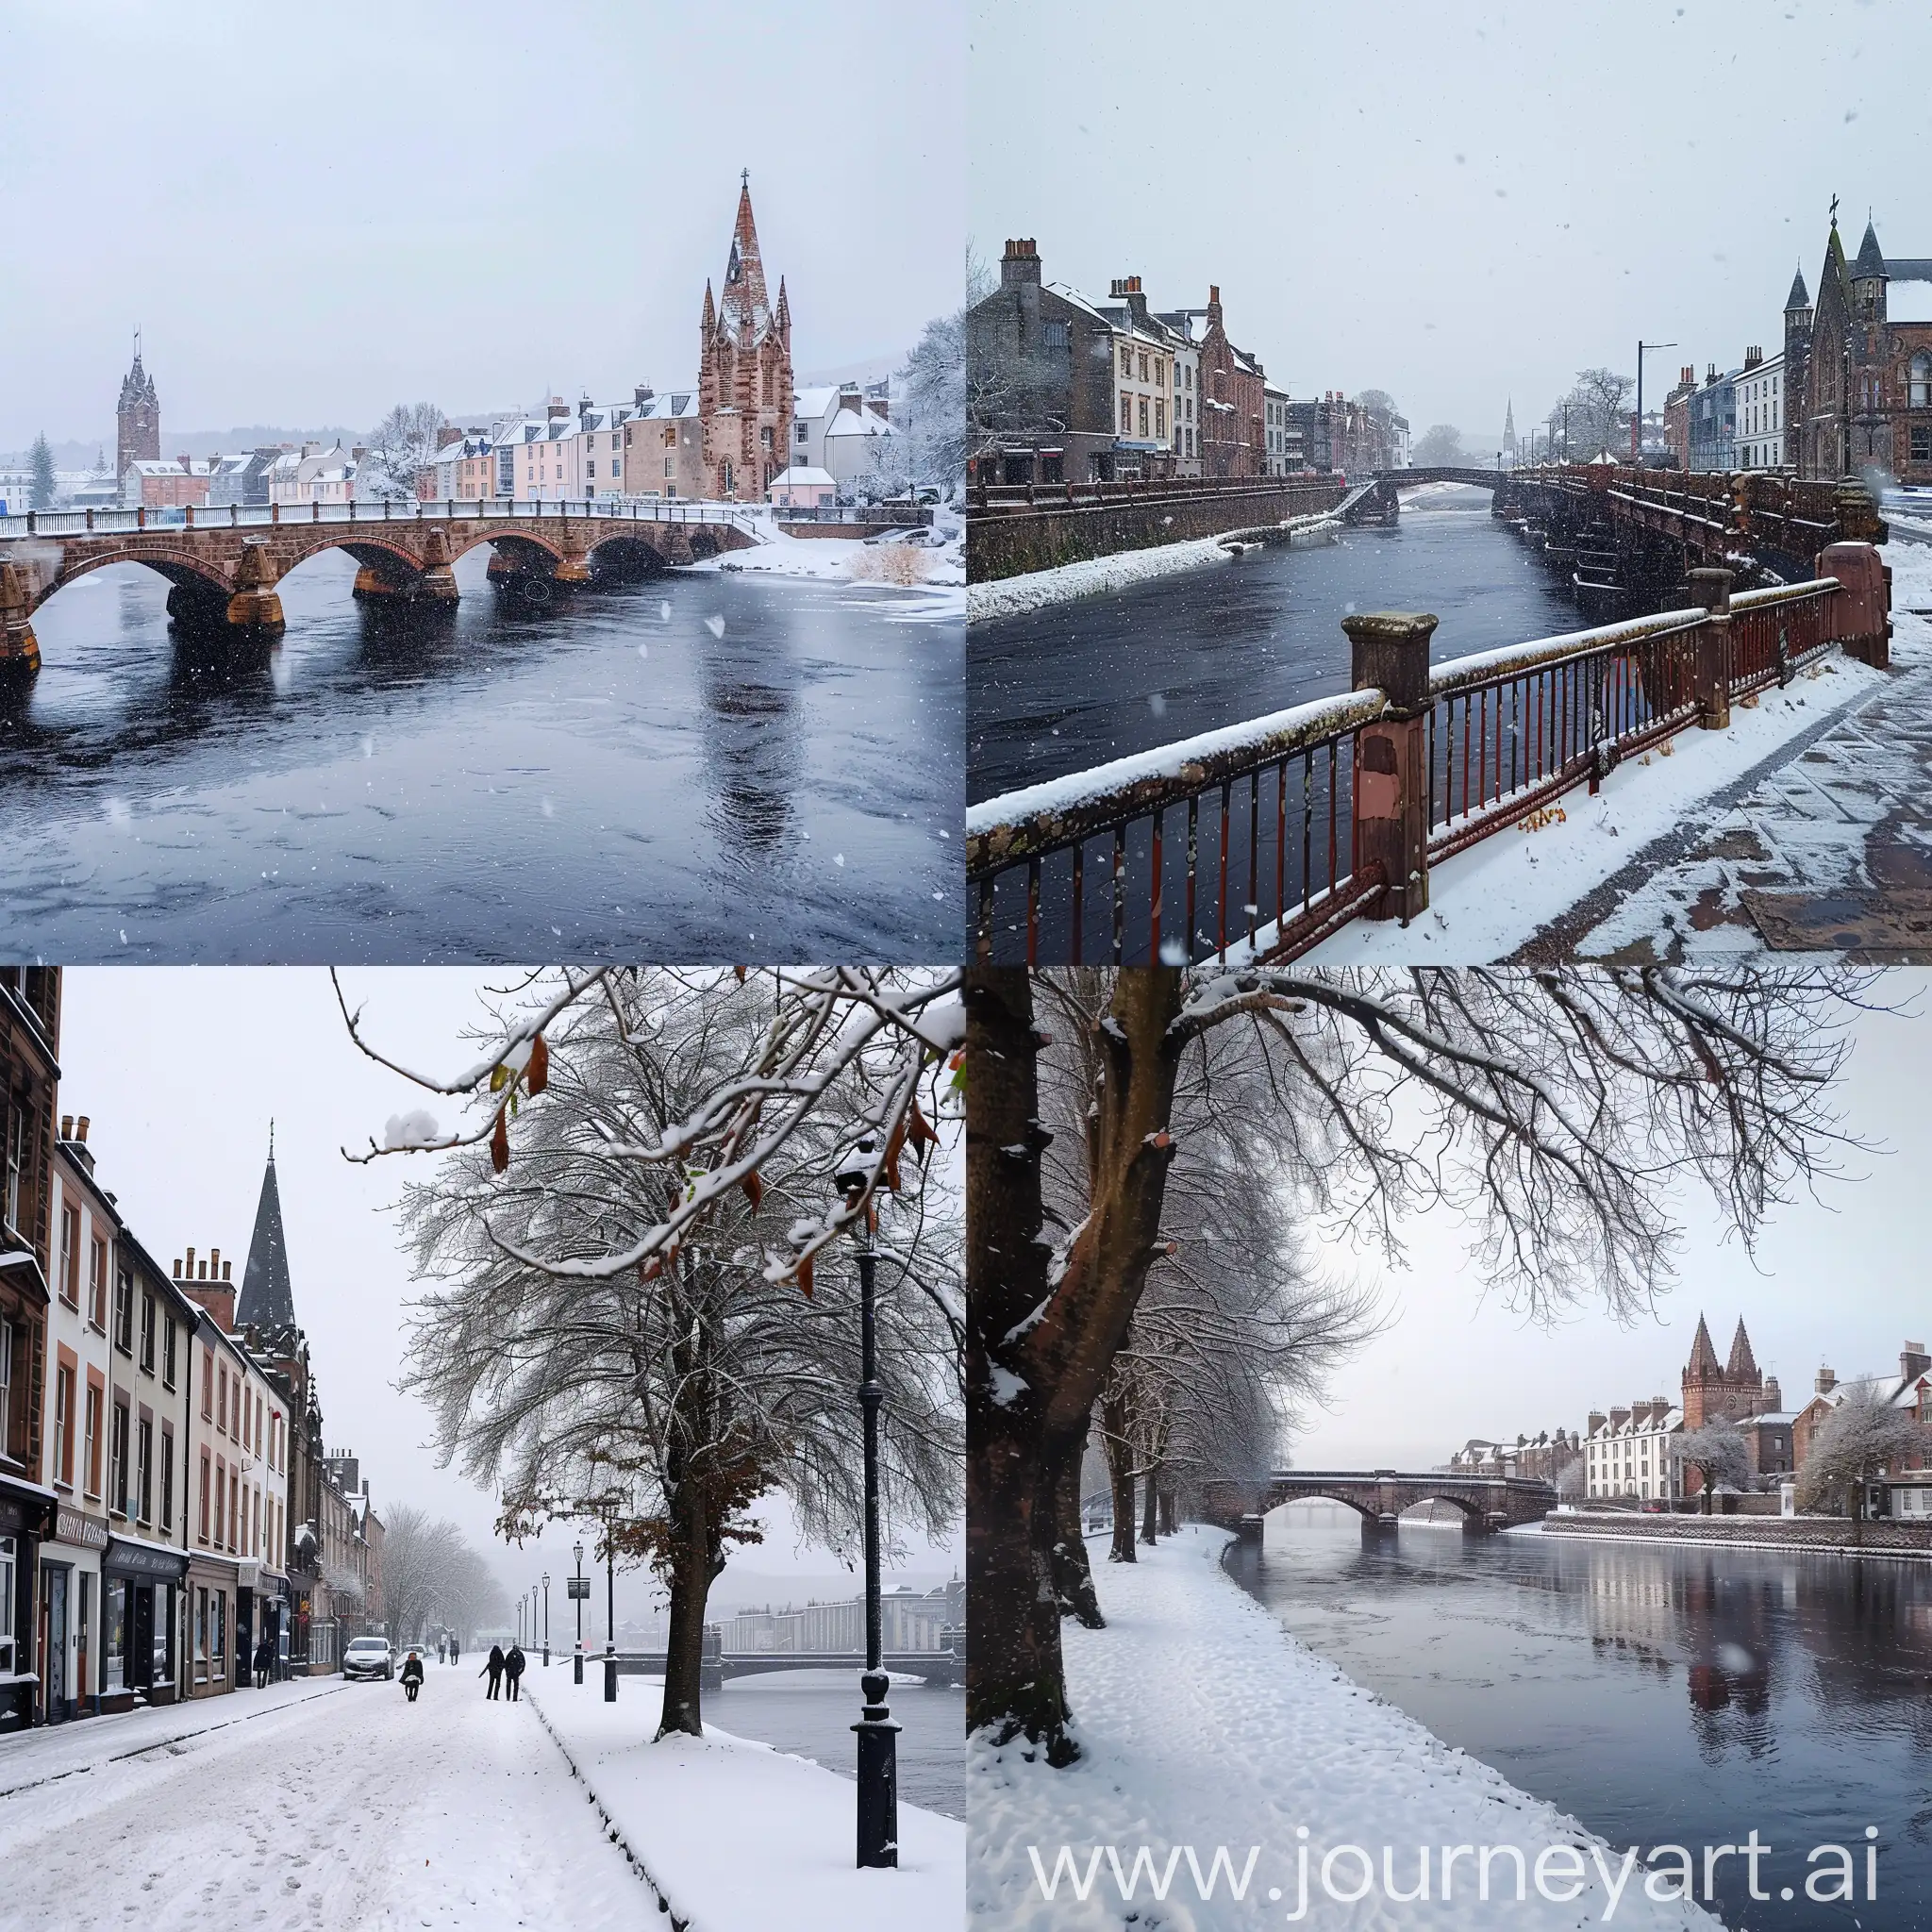 Inverness in a snowy day